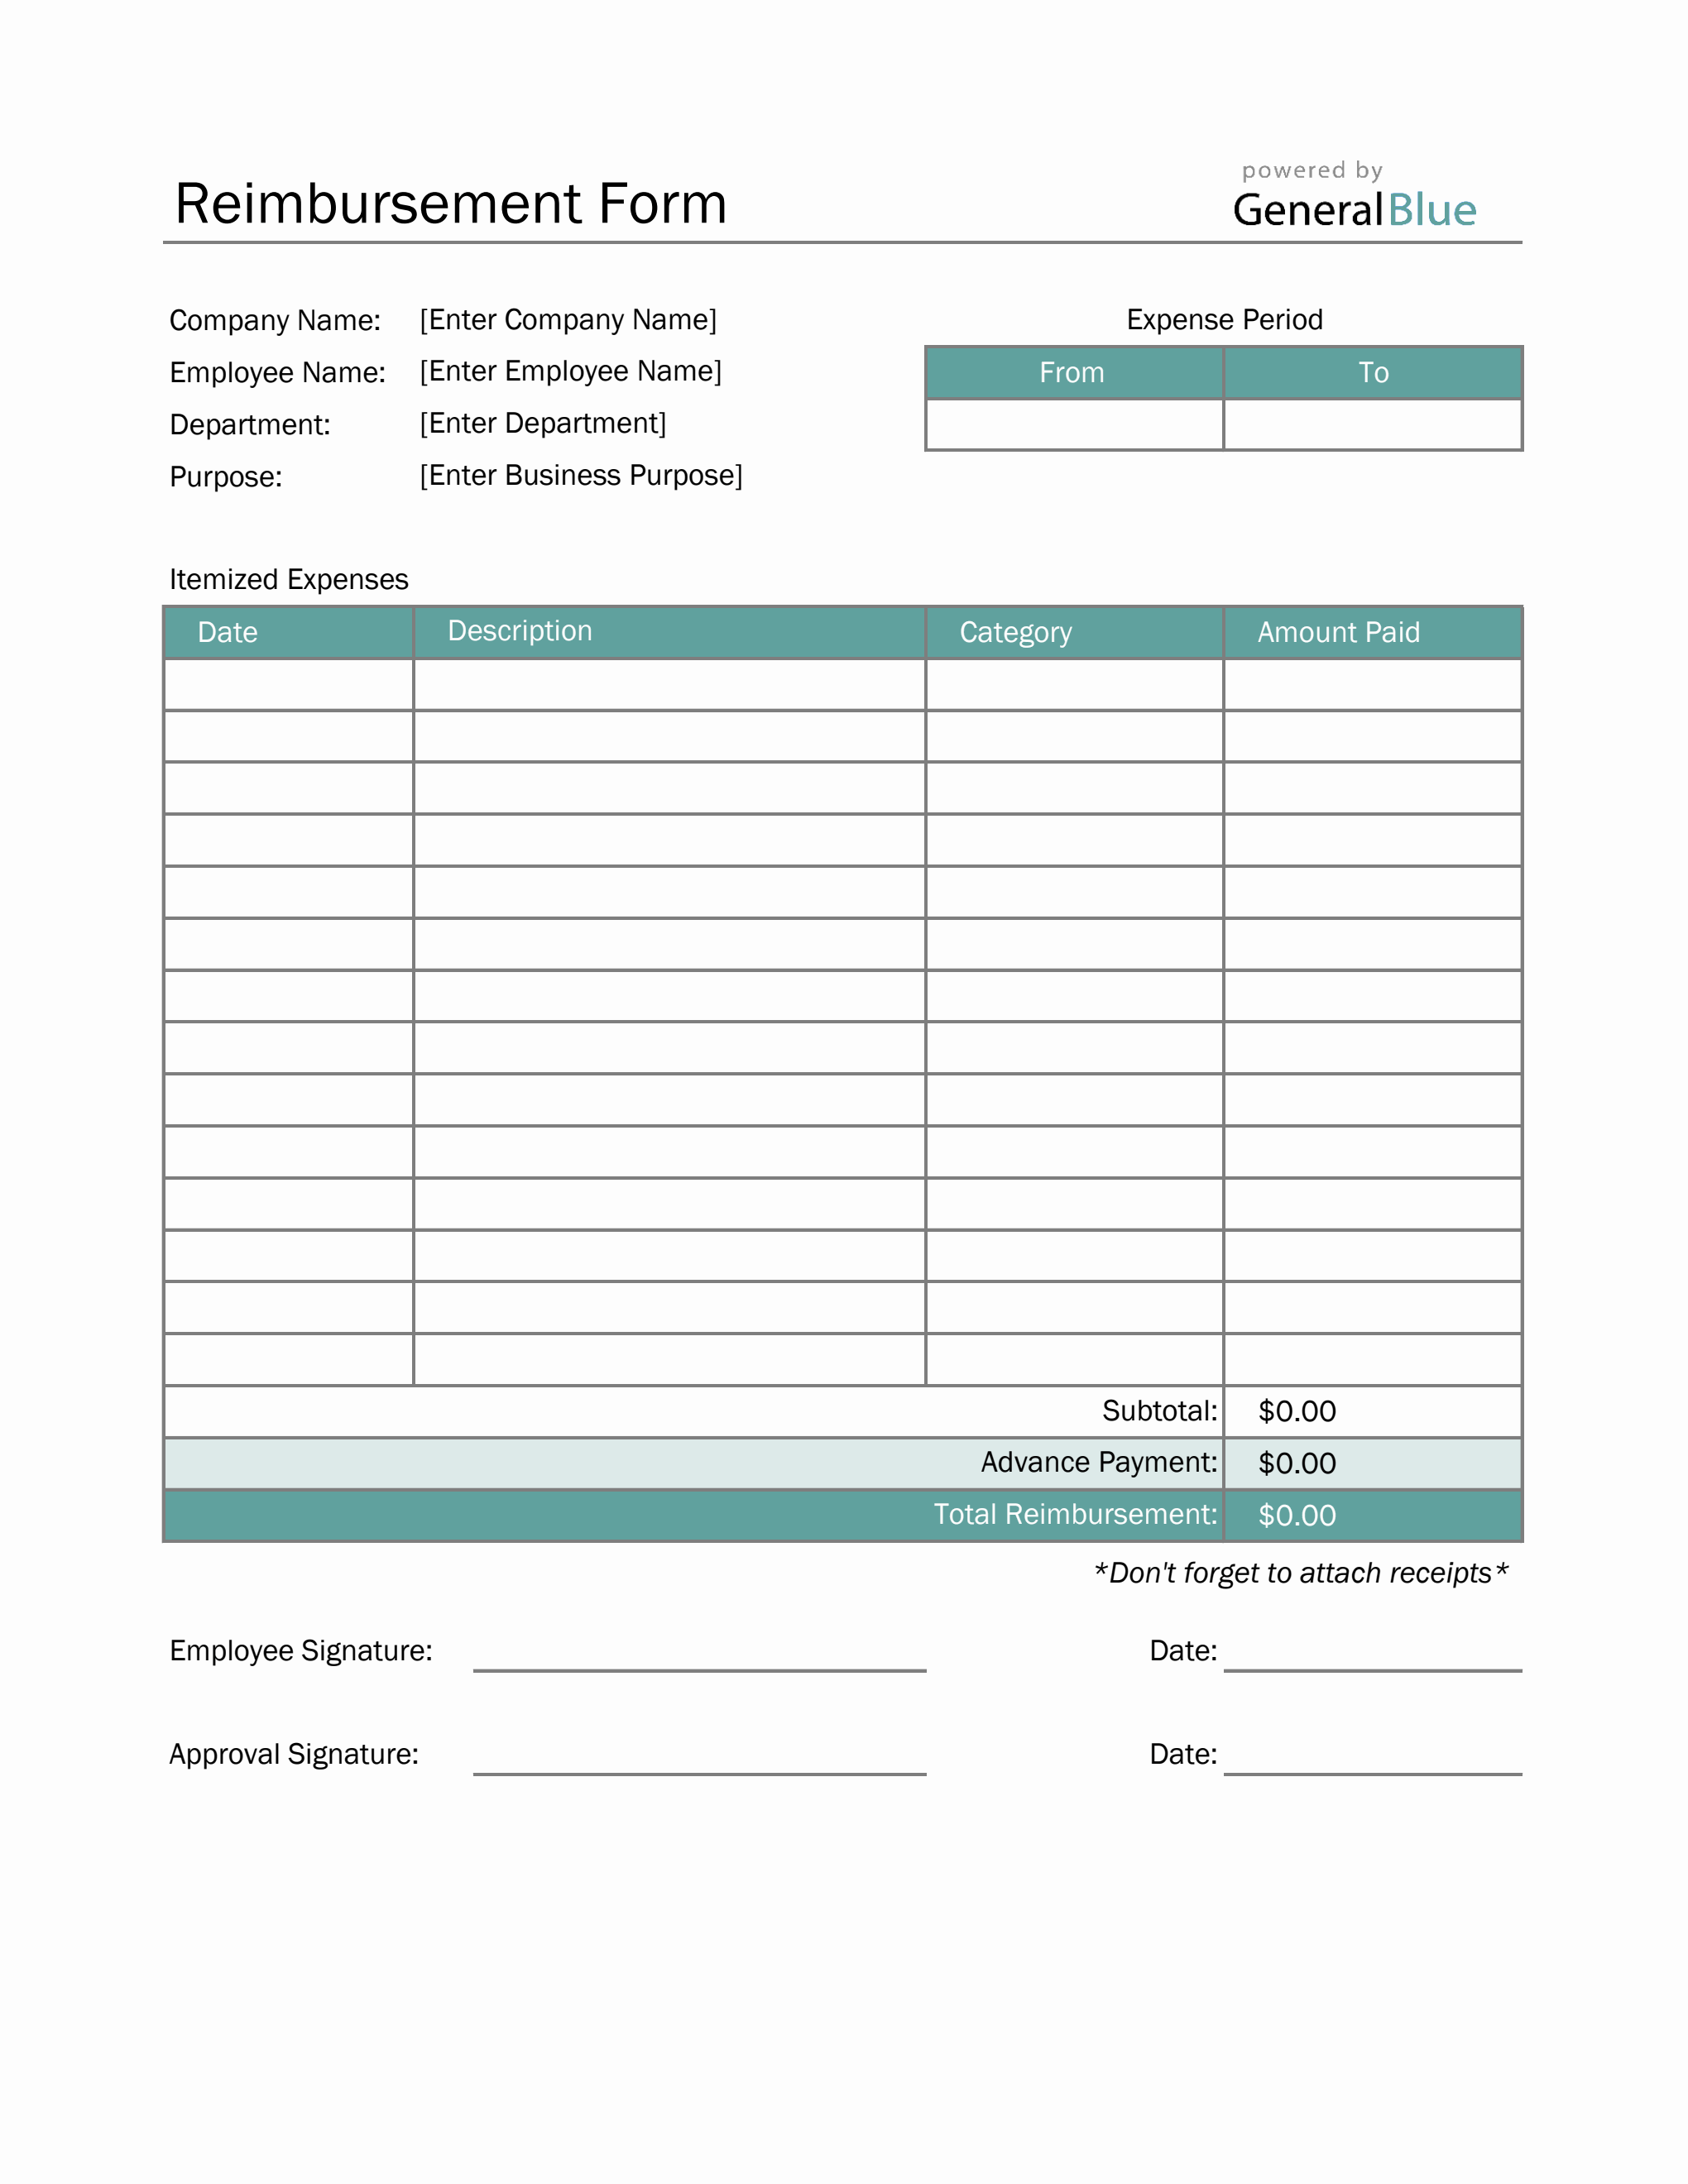 excel forms template